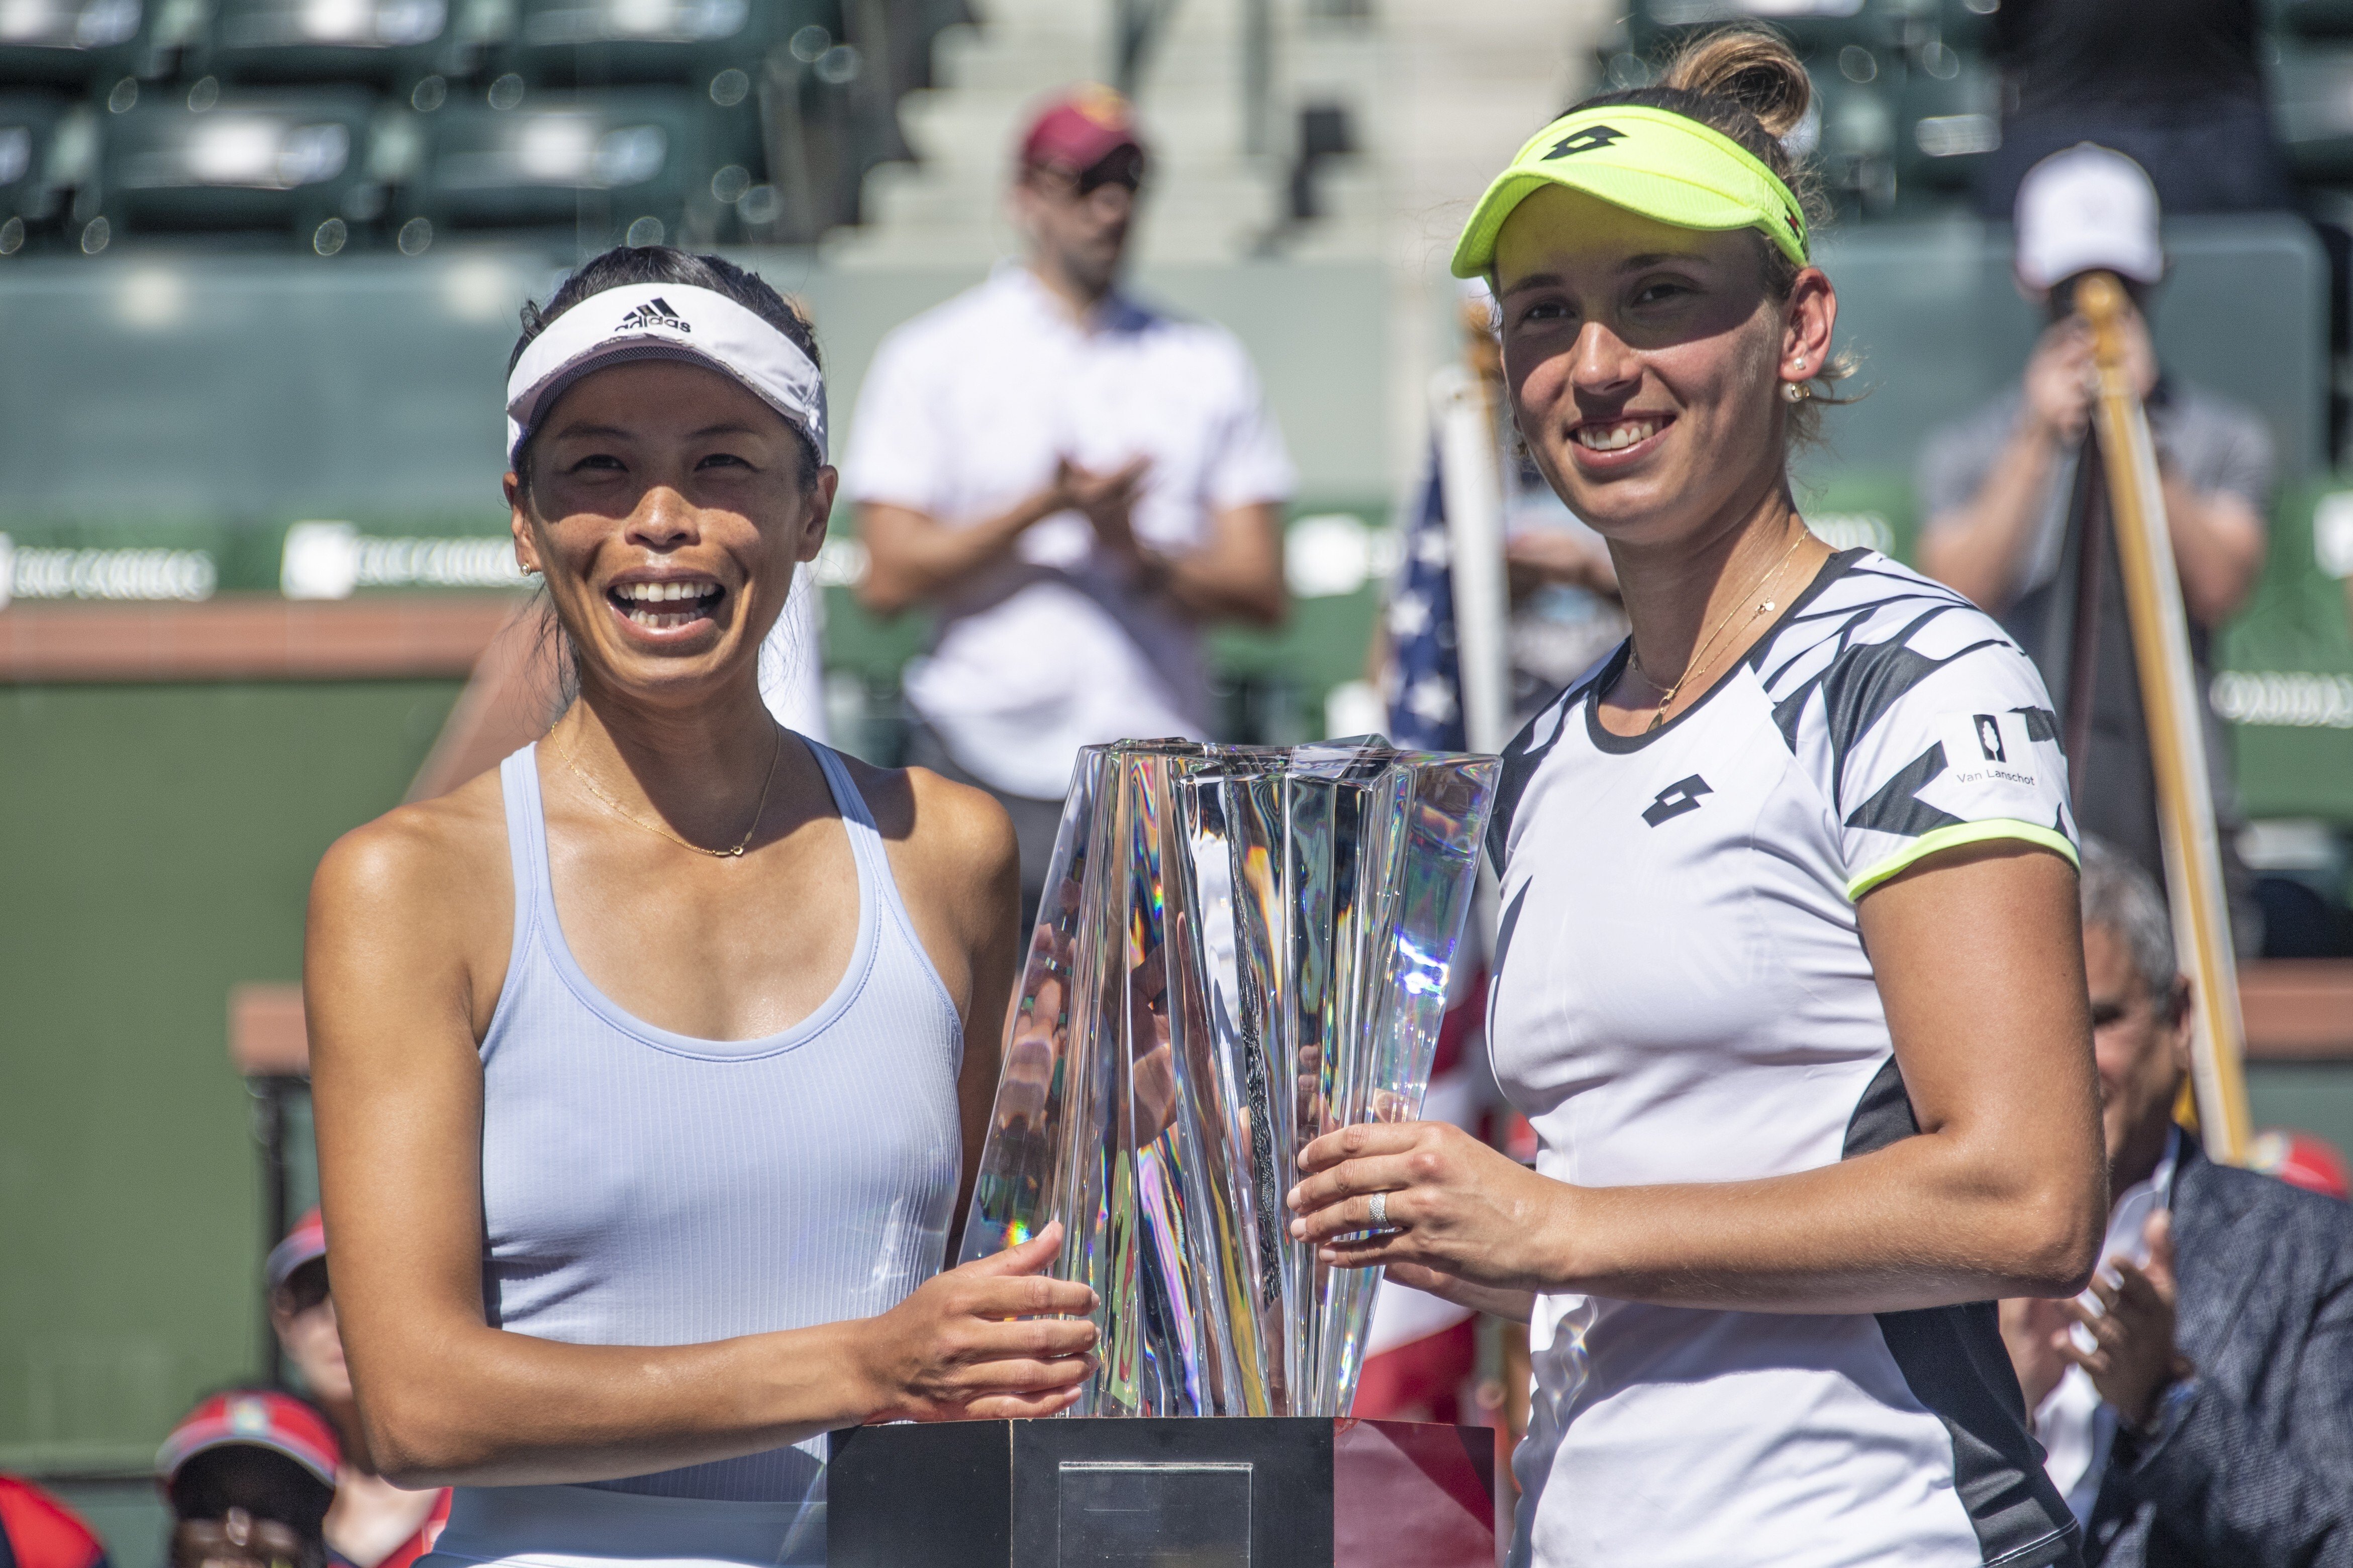 Hsieh Su-Wei and Elise Mertens claimed the doubles title at the Indian Wells Masters on Saturday. Photo: AP